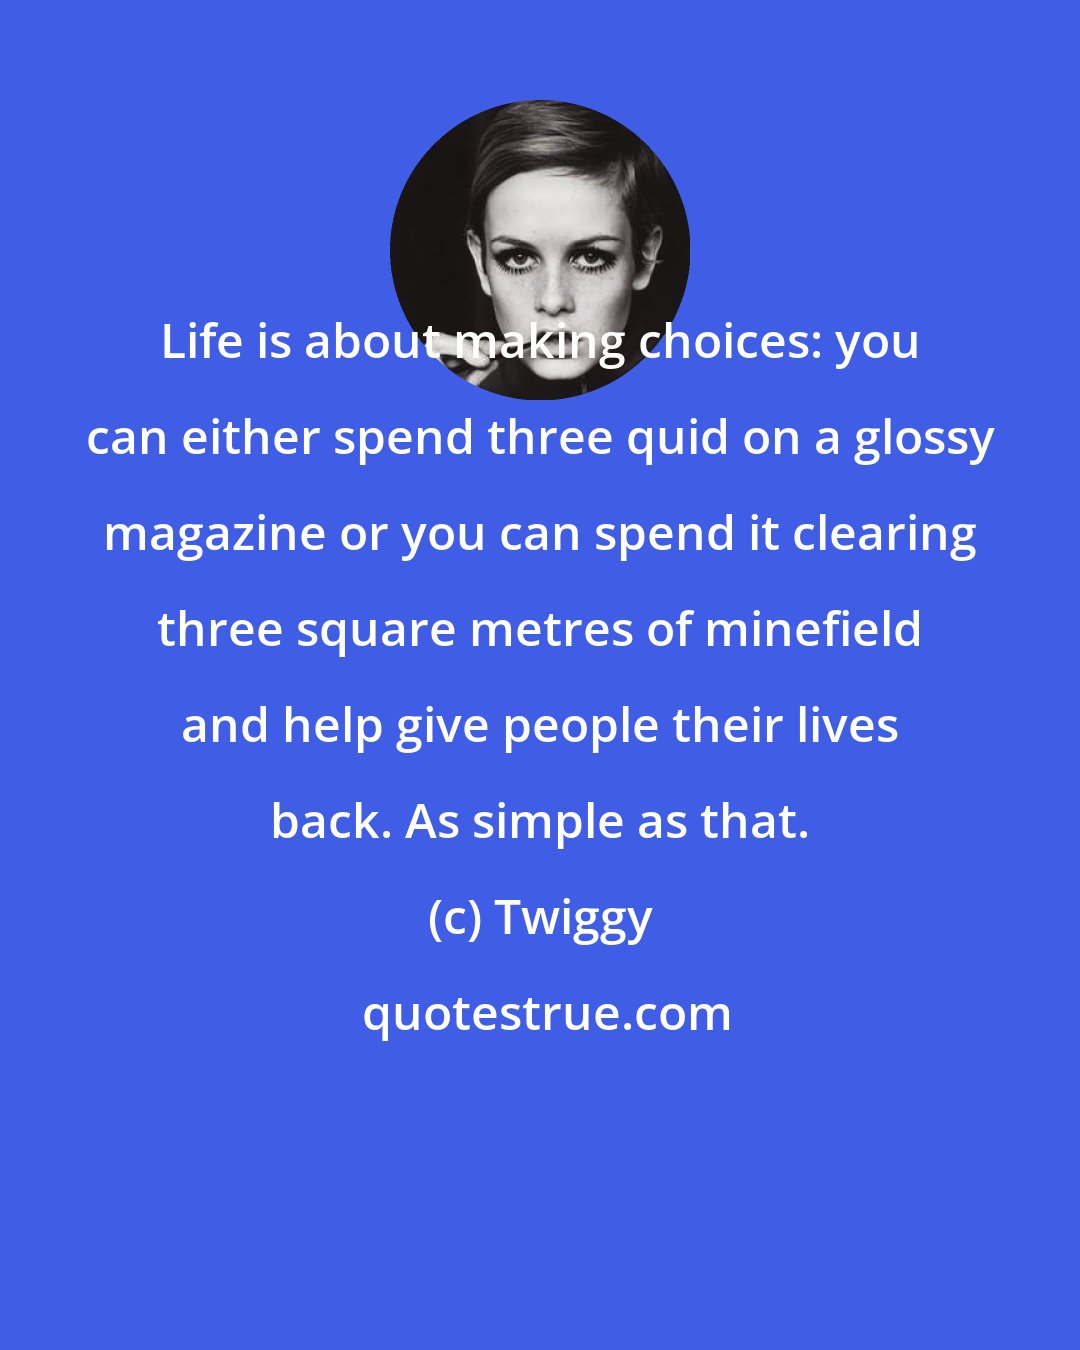 Twiggy: Life is about making choices: you can either spend three quid on a glossy magazine or you can spend it clearing three square metres of minefield and help give people their lives back. As simple as that.